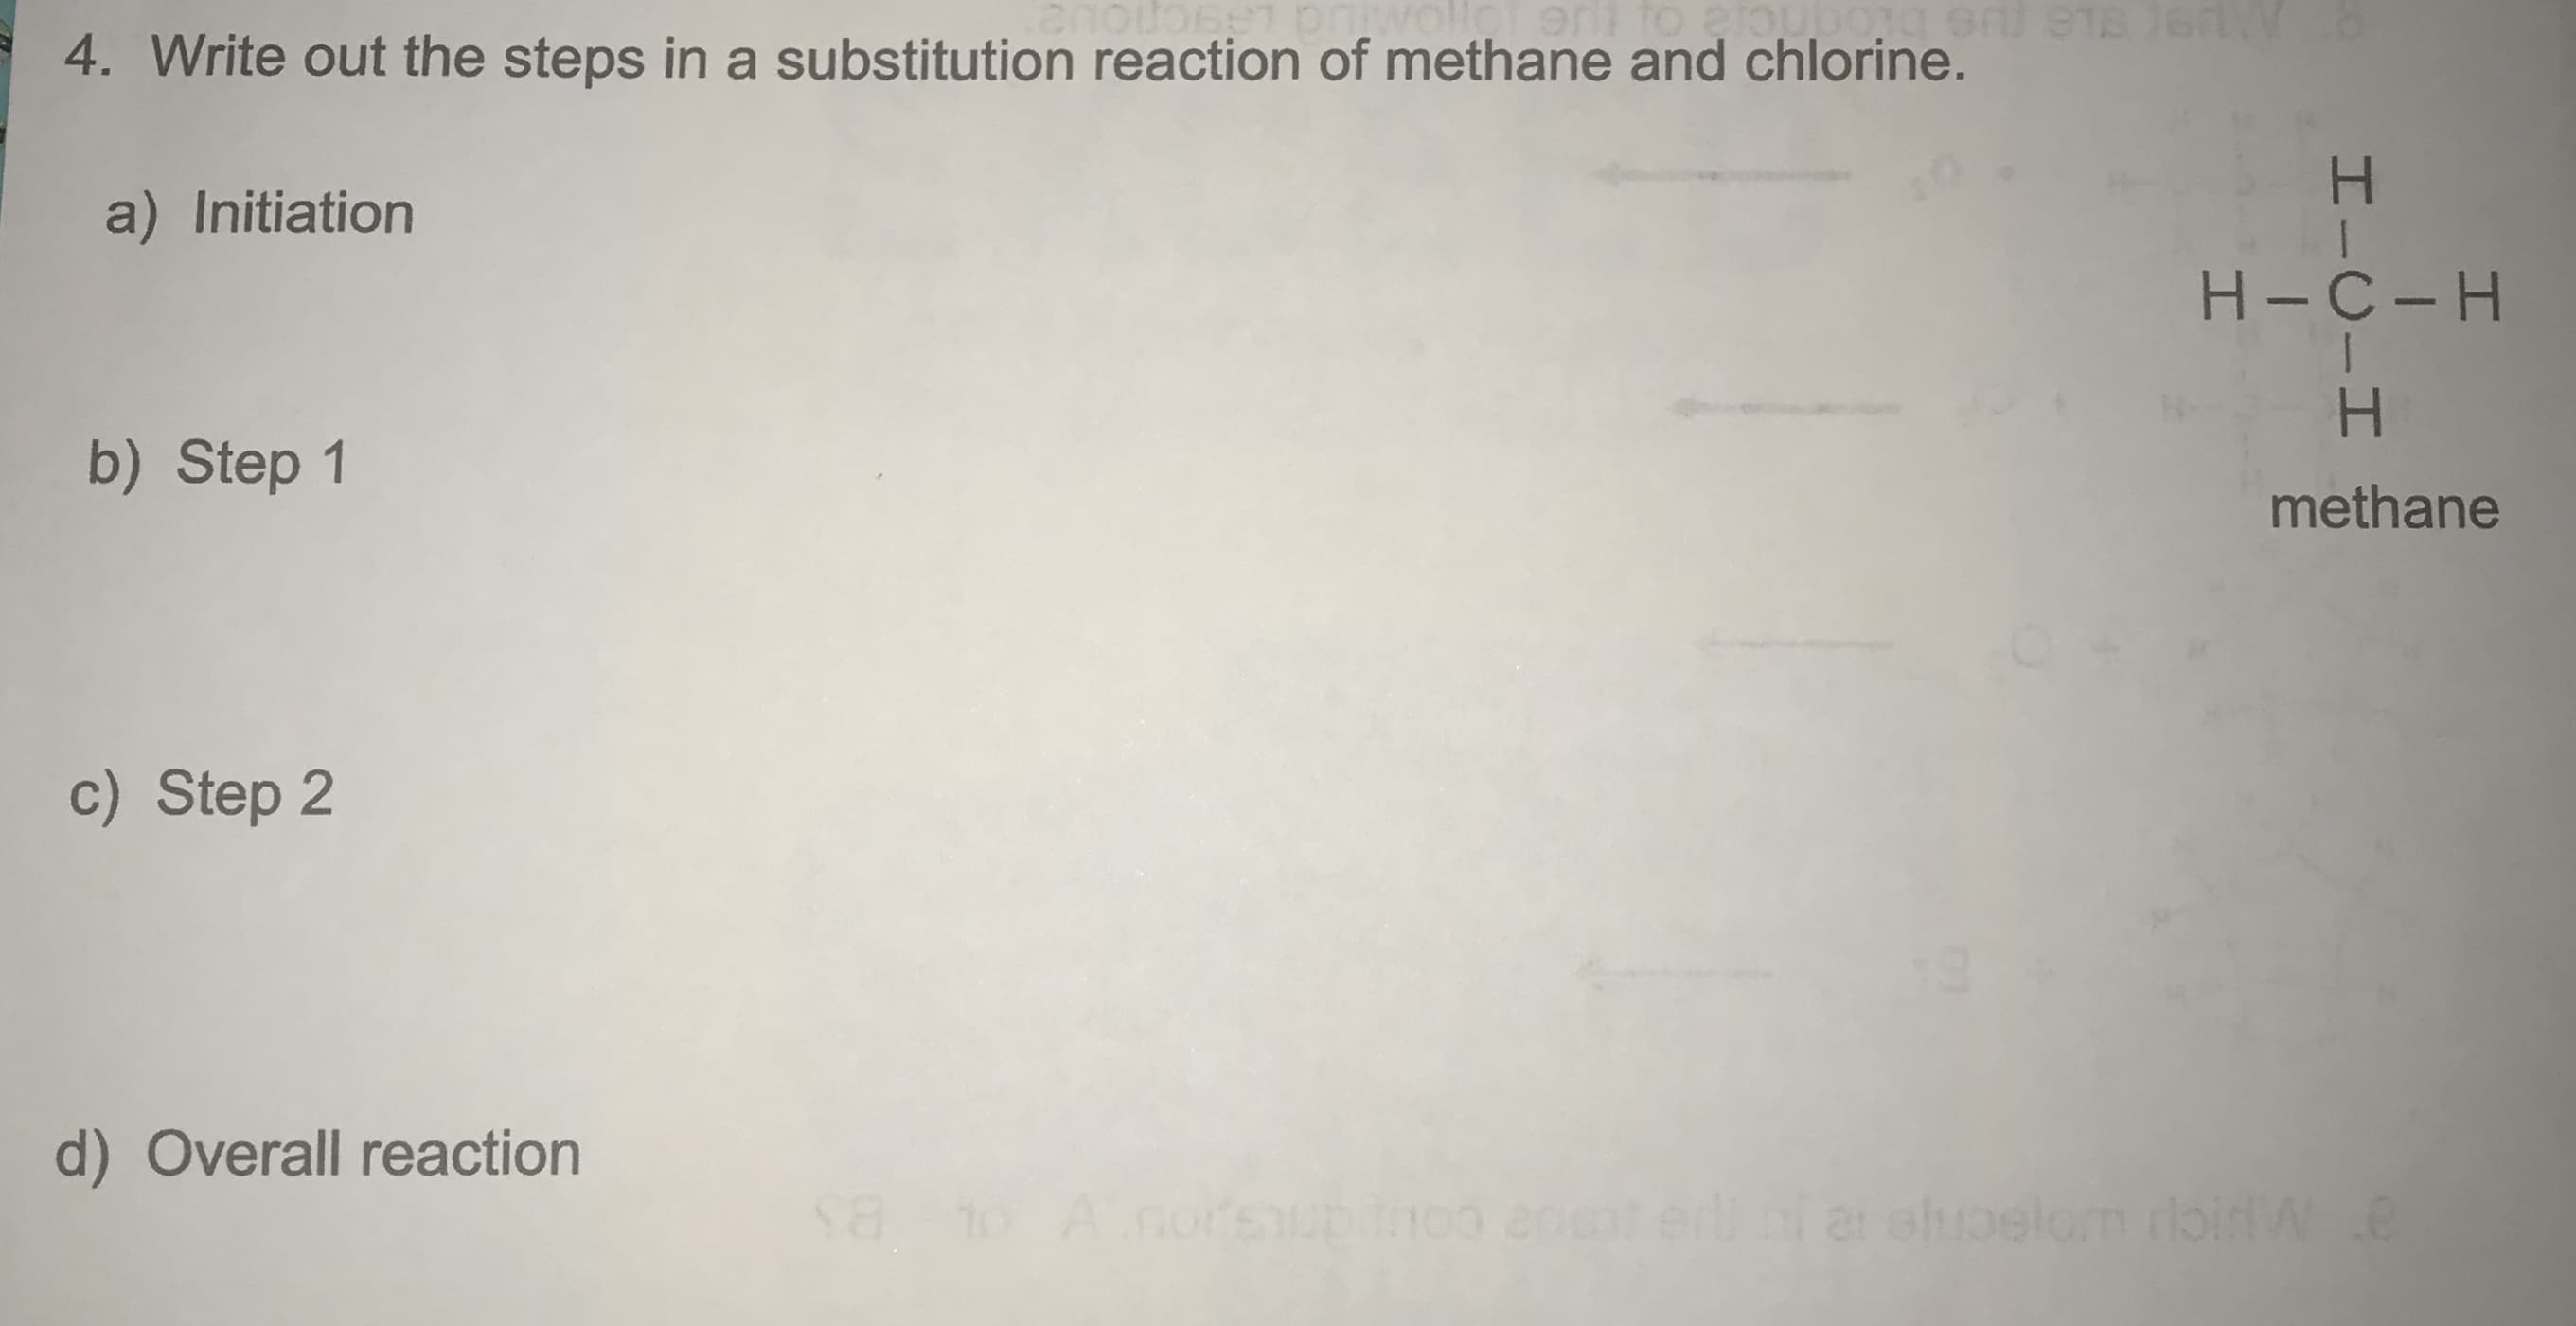 4. Write out the steps in a substitution reaction of methane and chlorine.
a) Initiation
H-C-H
b) Step 1
methane
c) Step 2
d) Overall reaction
Anoreupin0o a0et erli i a eloelom roidW.e
HICIH
